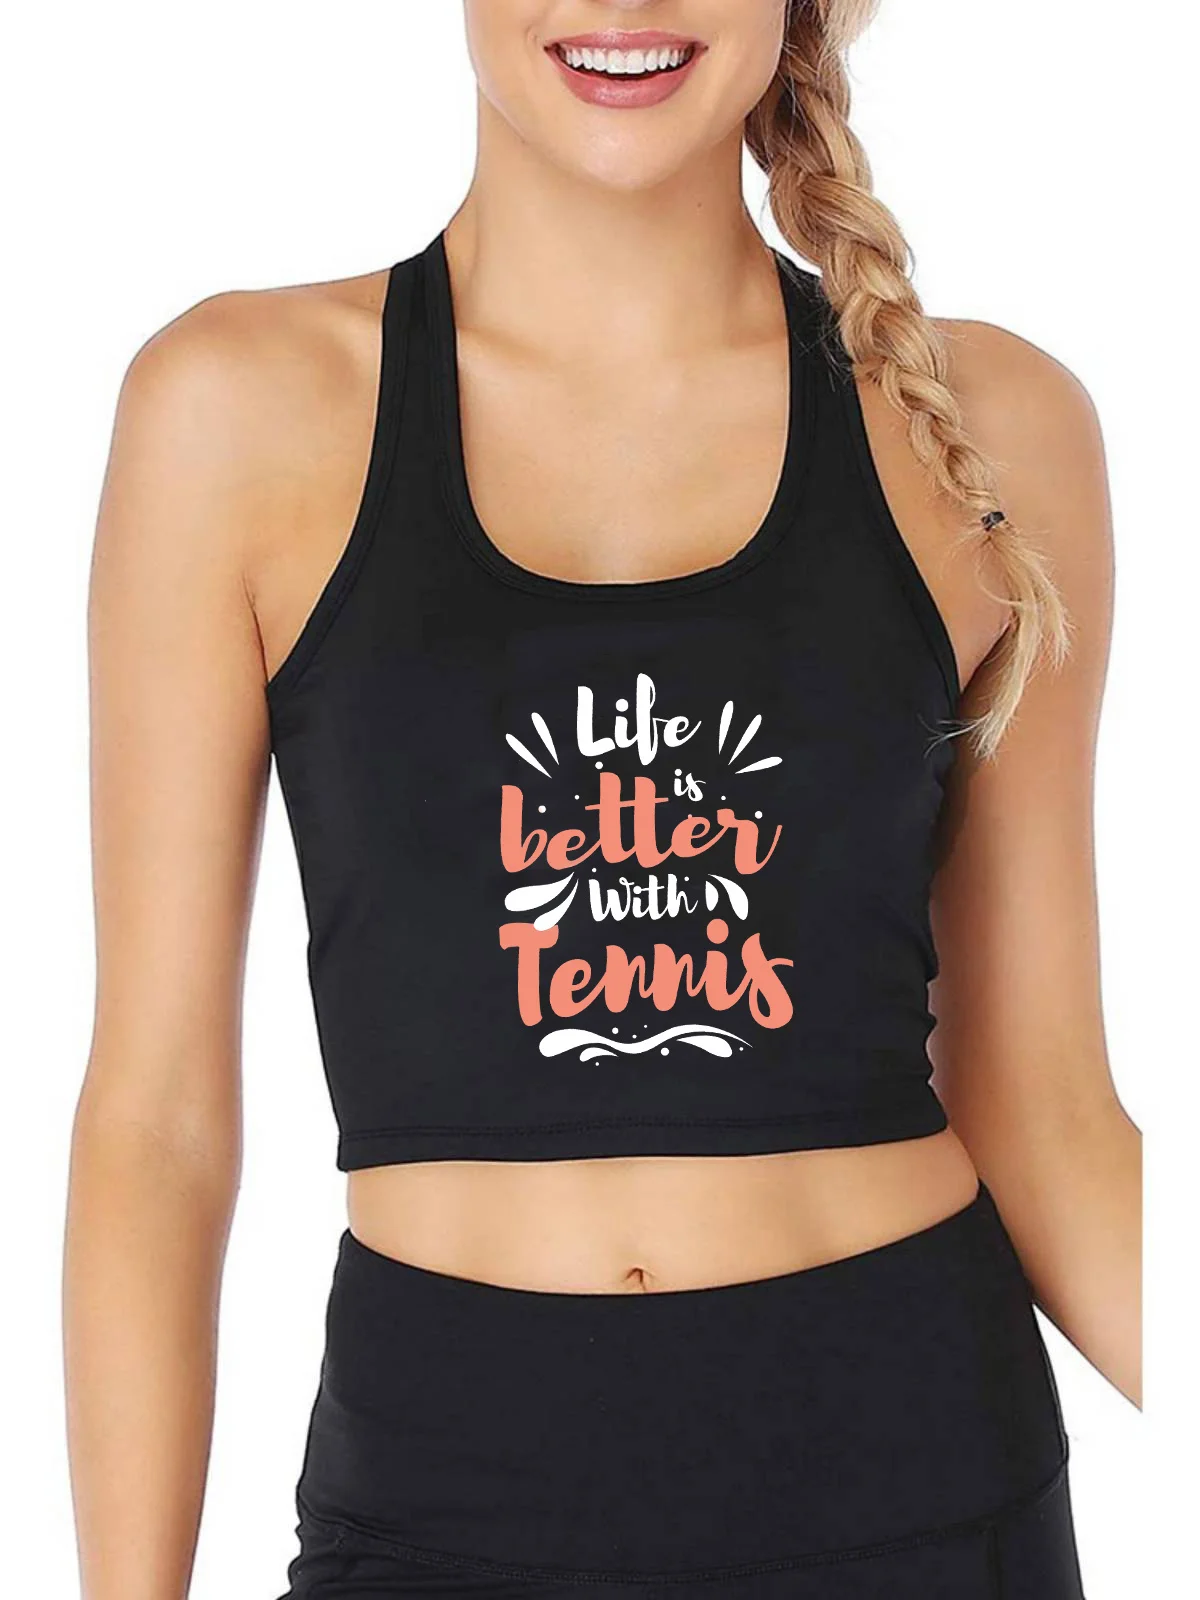 

Tennis Themed Comic Quotes Gifts Tank Top Women's Breathable Slim Fit Workout Crop Tops Summer Camisole